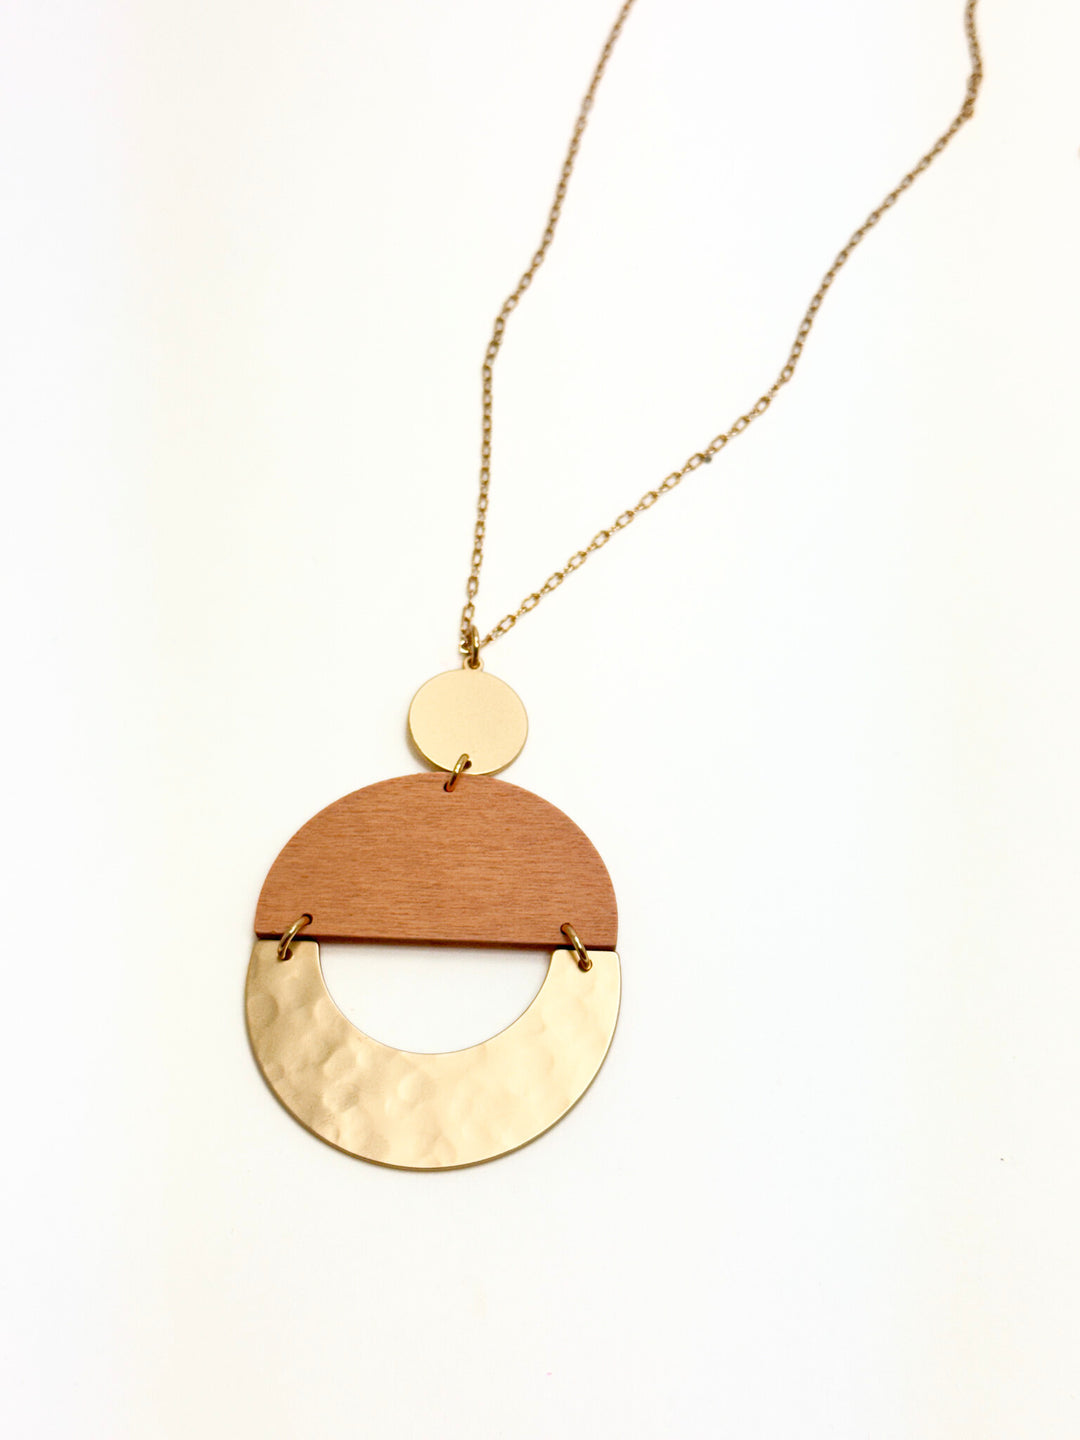 Long Gold Necklace with Light Tan/Gold Pendant